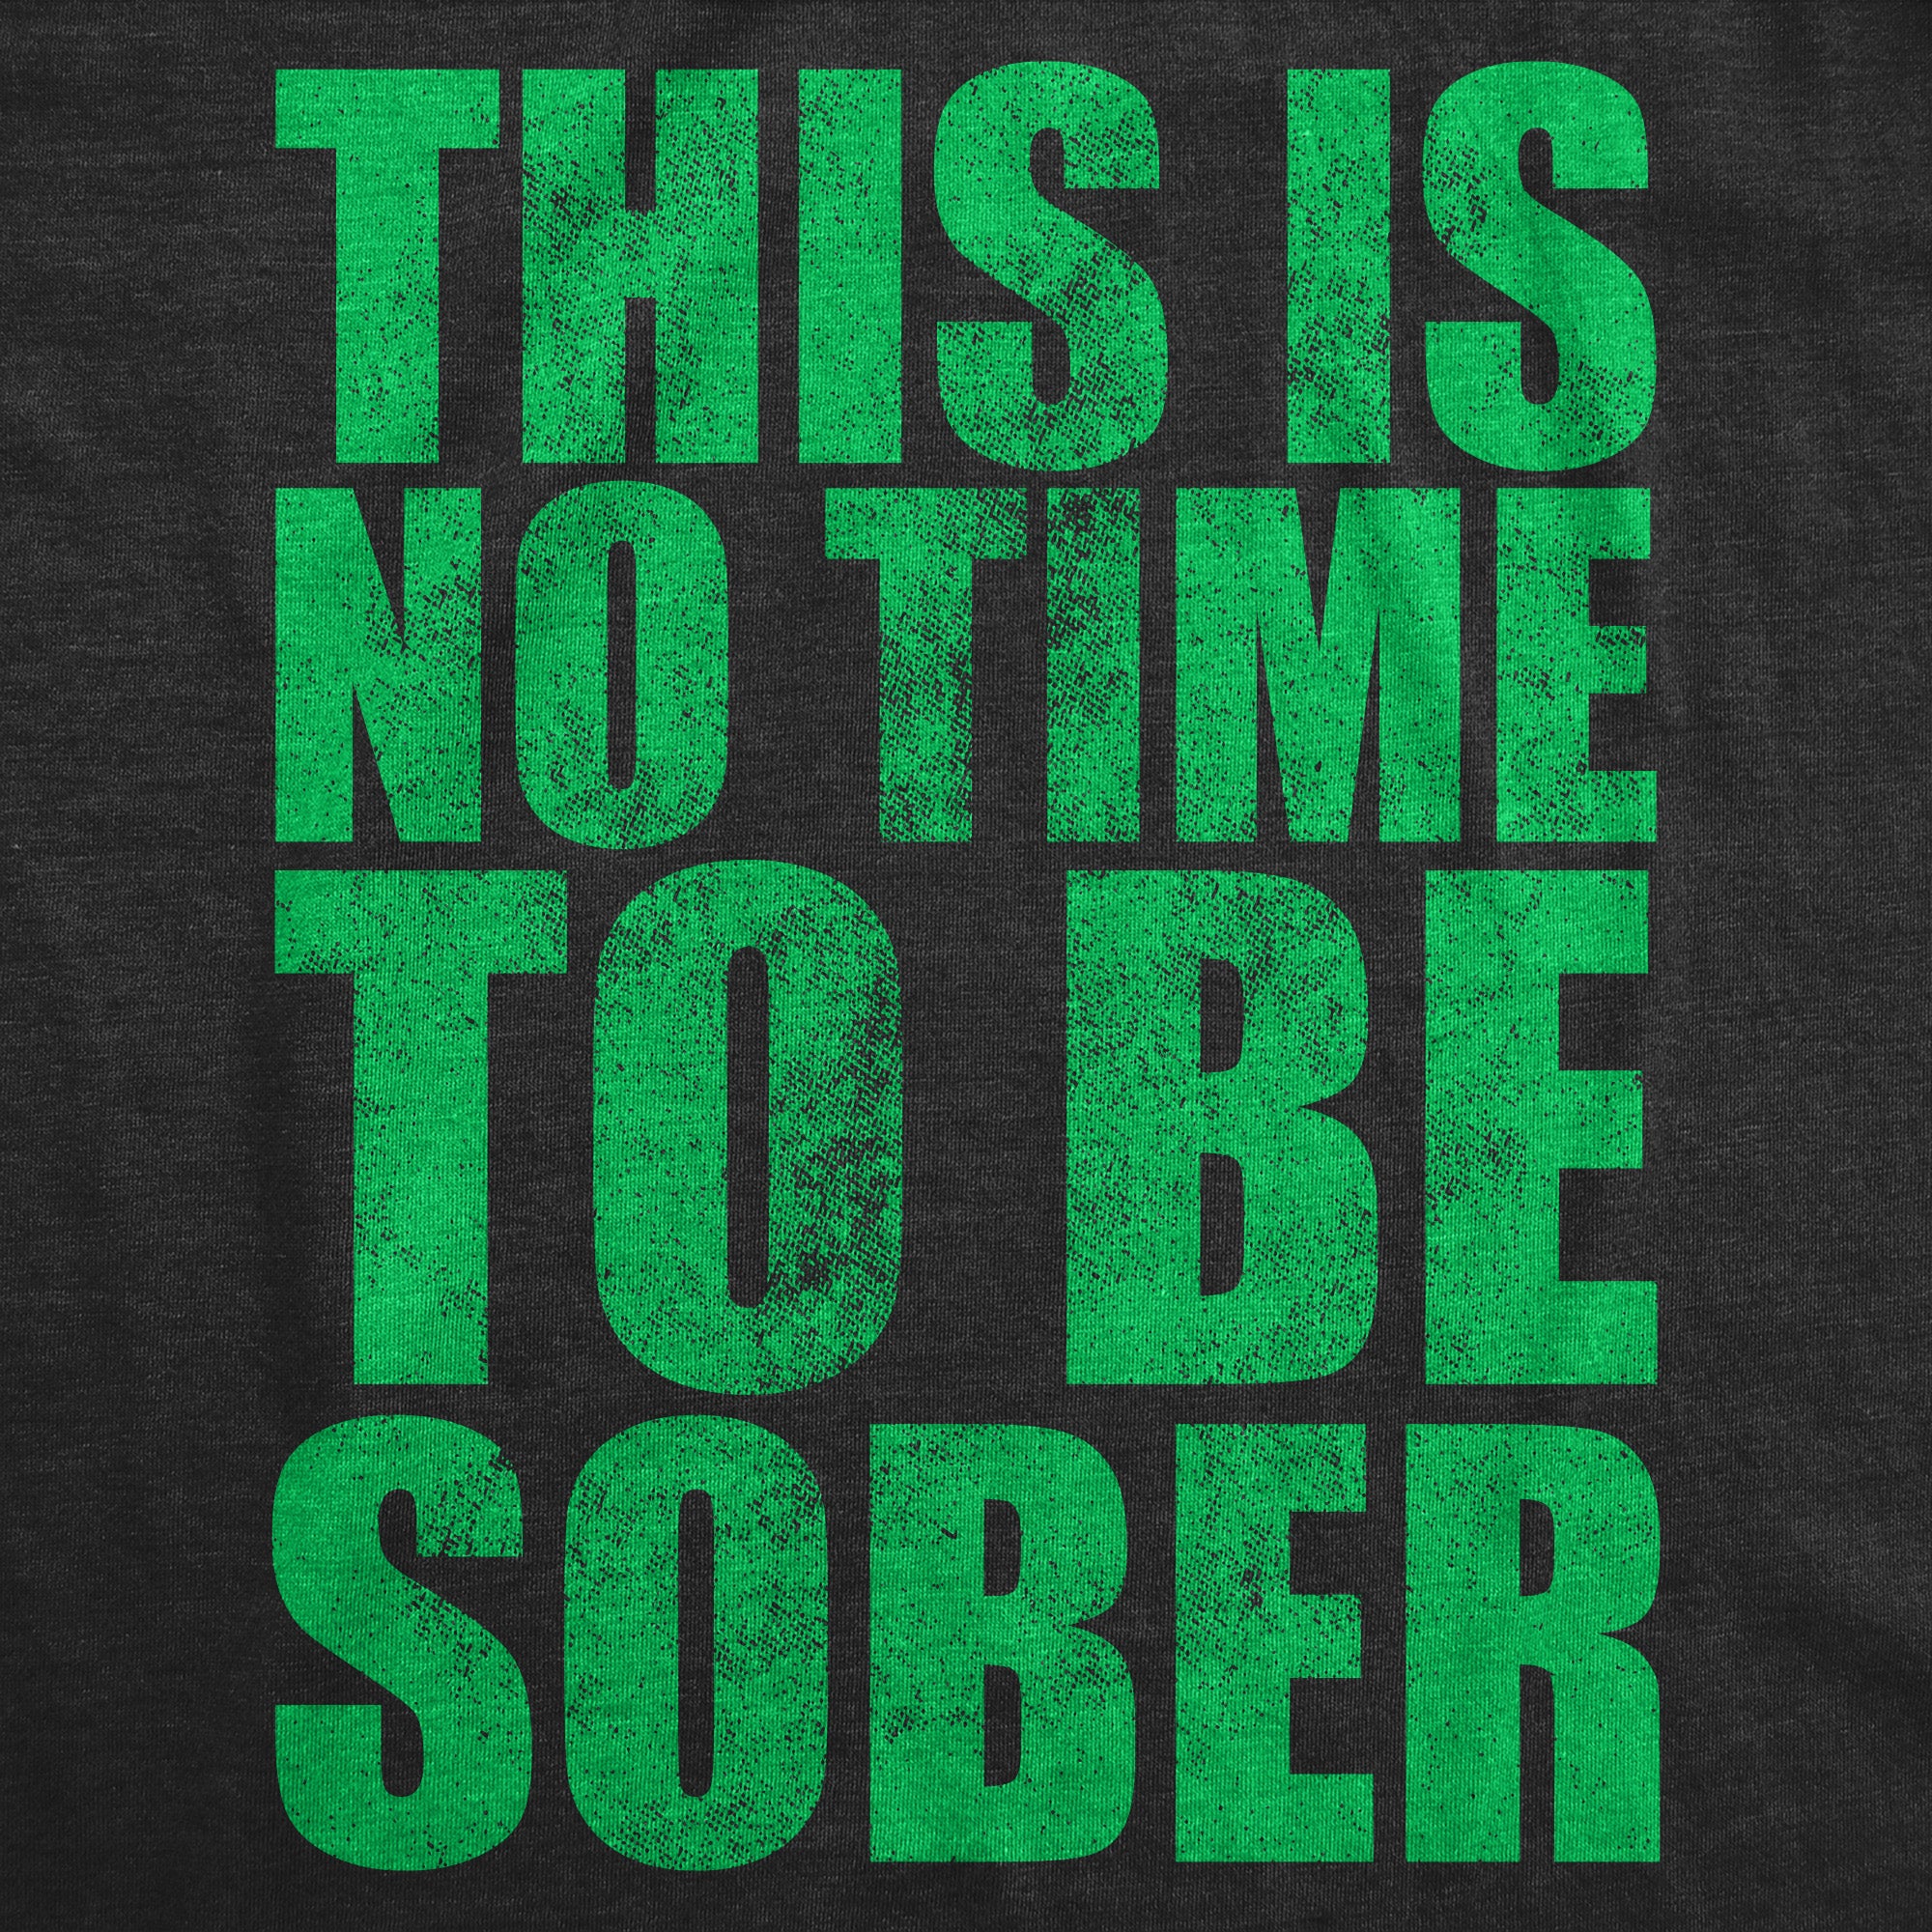 Funny Heather Black - This Is No Time To Be Sober This Is No Time To Be Sober Mens T Shirt Nerdy Drinking sarcastic Tee